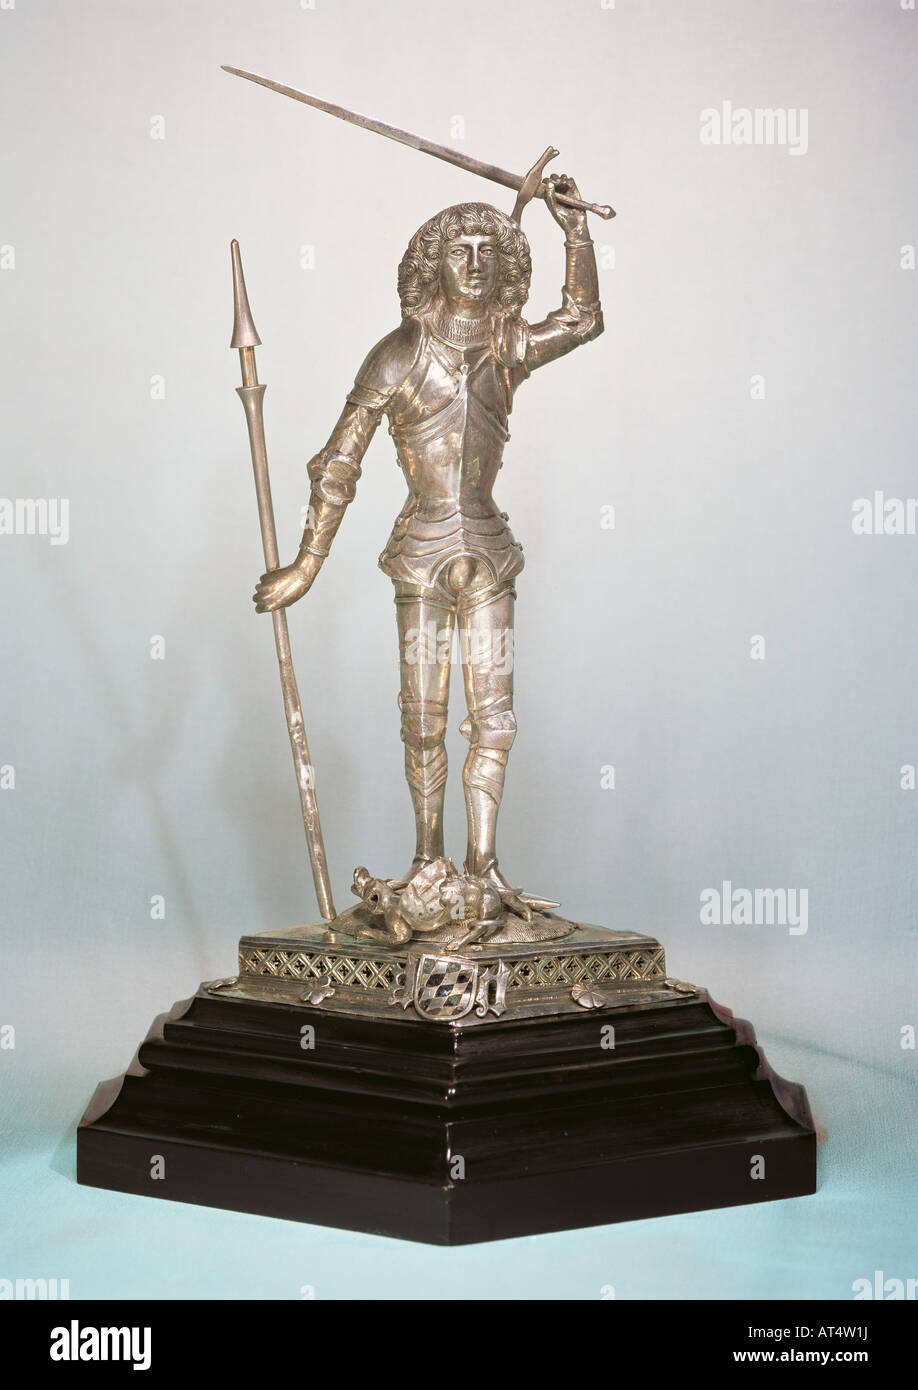 fine arts, sculpture, Saint George, silver, chased, wooden pedestal, Southern Germany, circa 1470, Bavarian National Museum, Munich, Artist's Copyright has not to be cleared Stock Photo